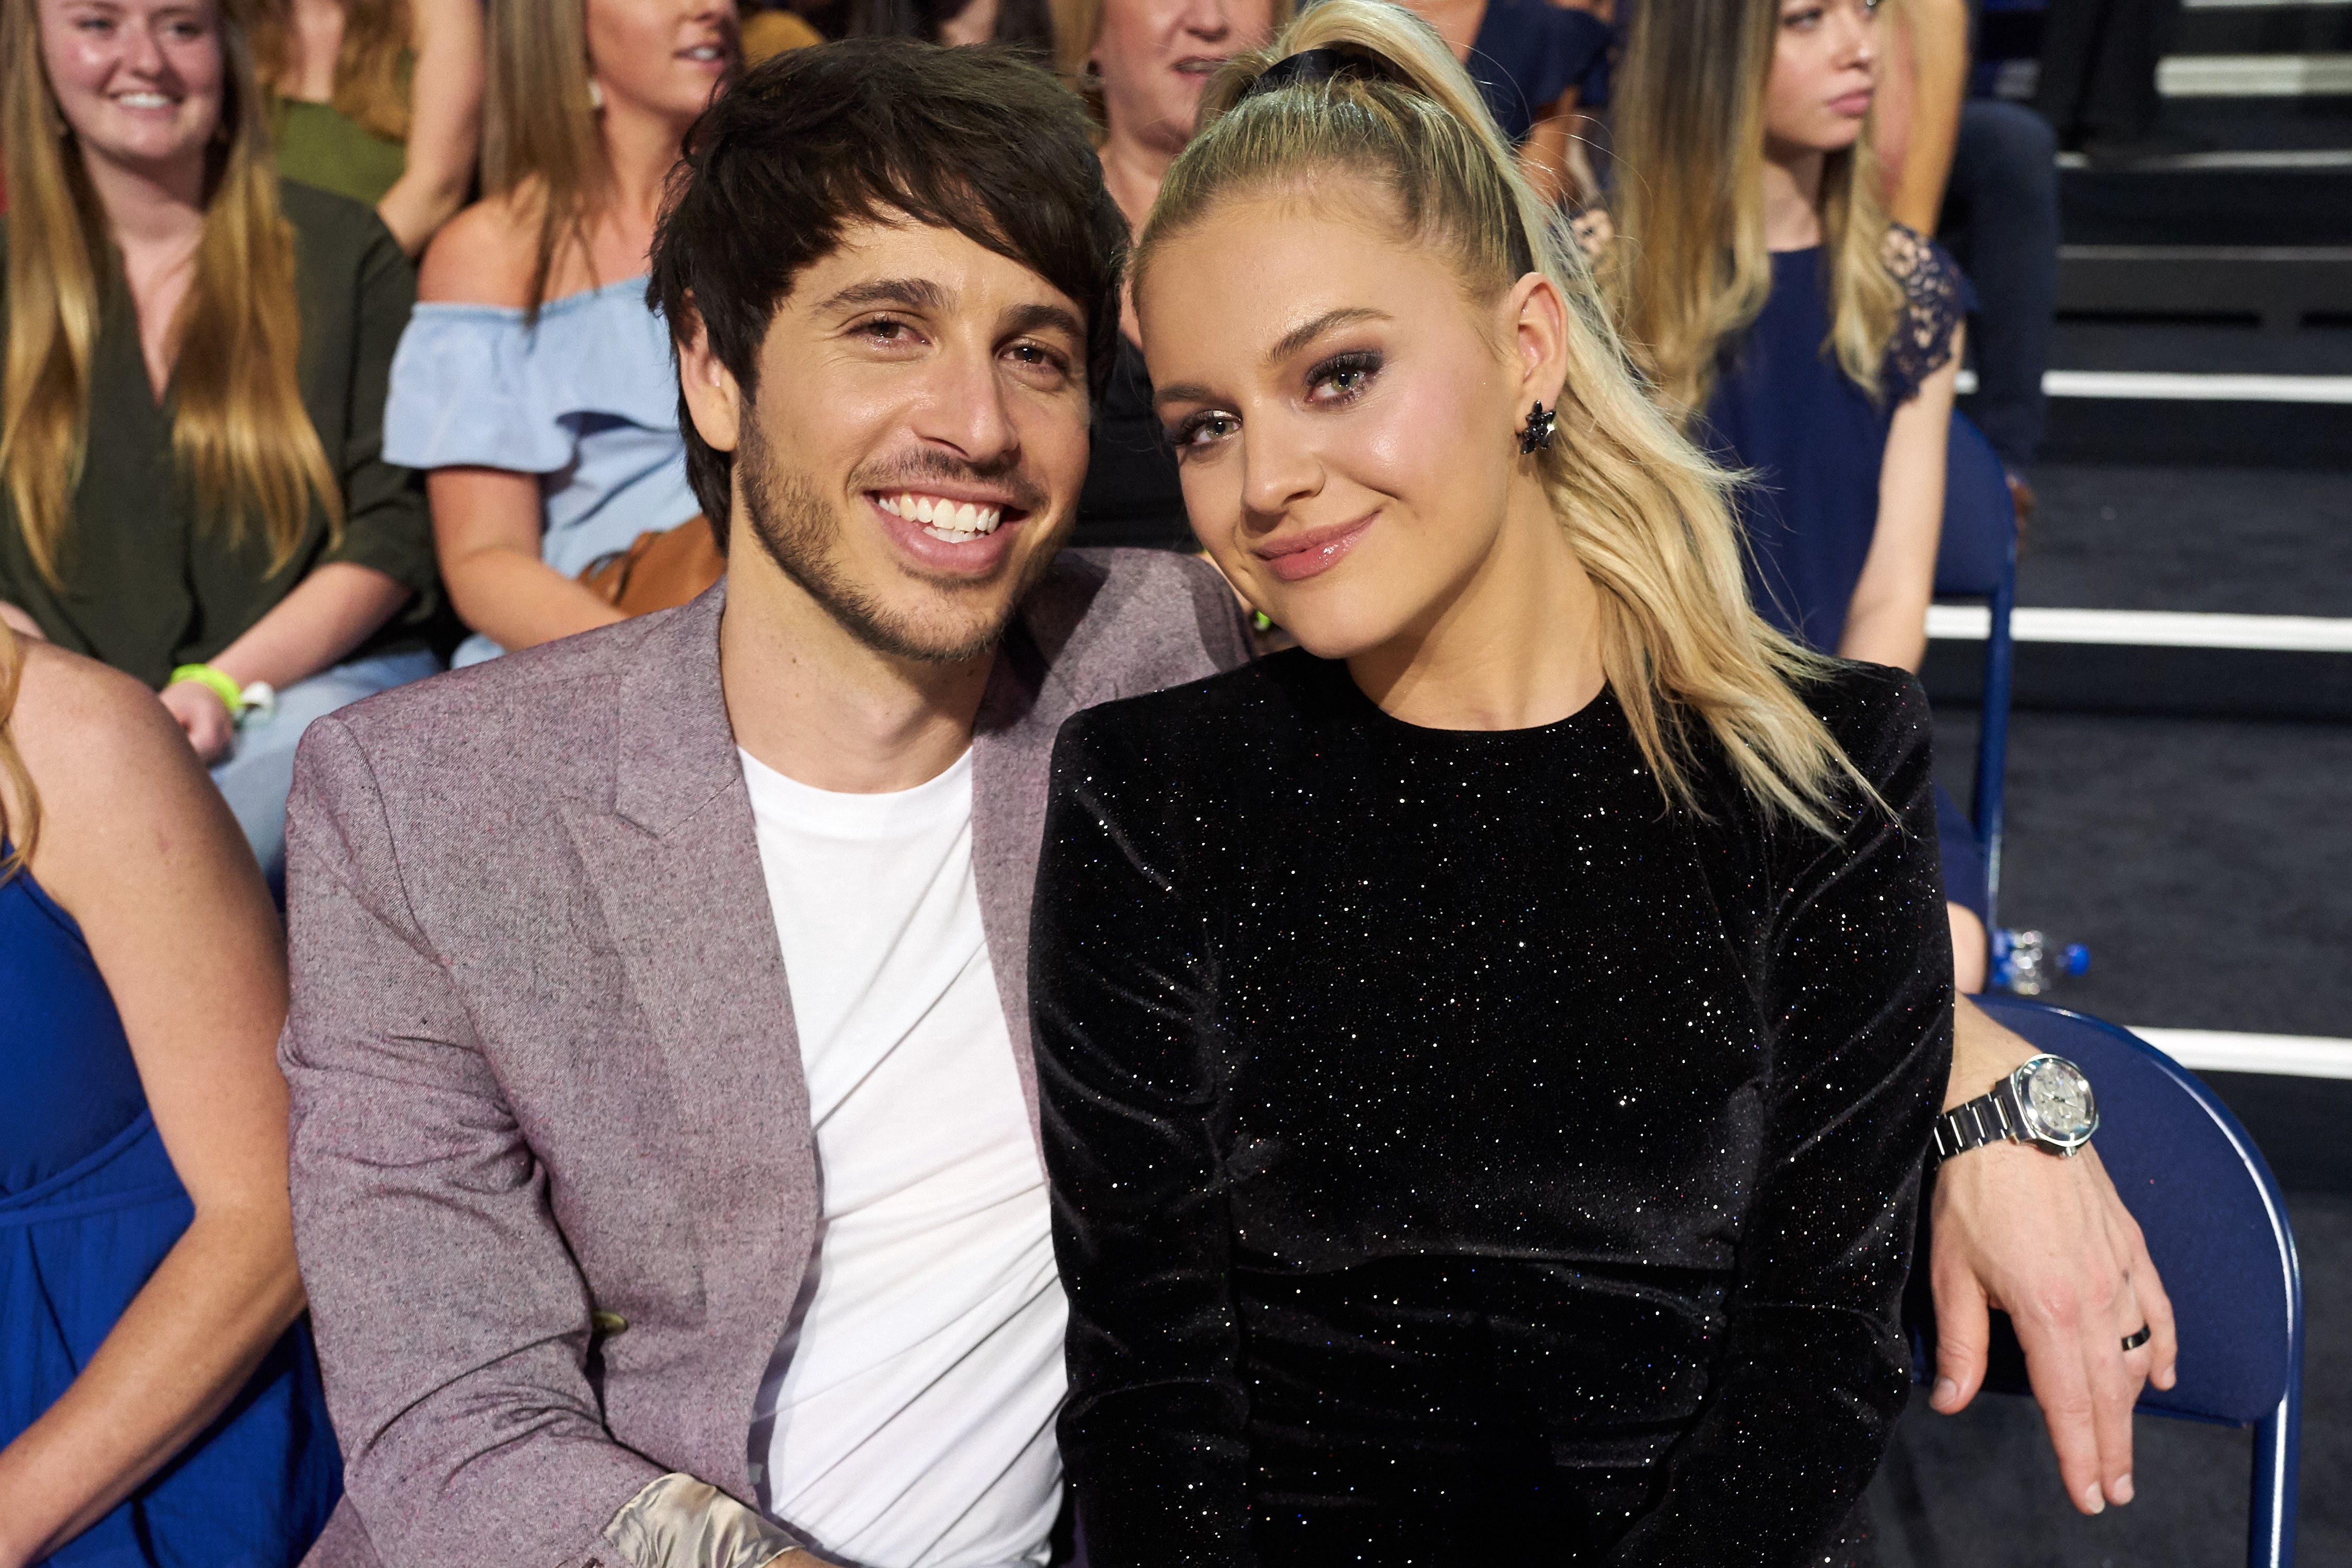 Kelsea Ballerini ex Morgan Evans responds to scathing new interview, says claims 'aren't reality'